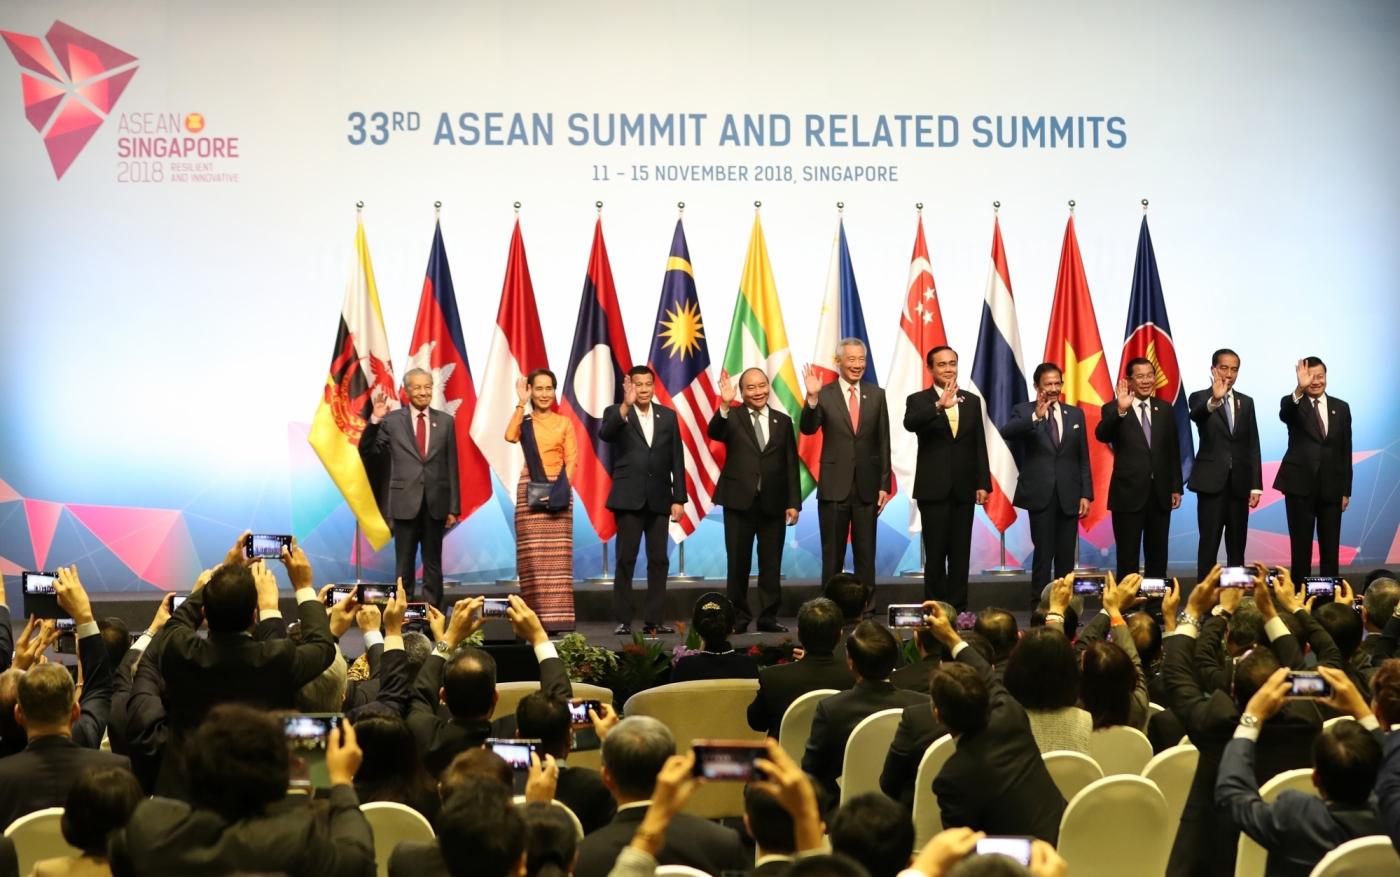 SINGAPORE, Nov. 13, 2018 (Xinhua) -- Leaders pose for photos during the opening ceremony of the 33rd summit of the Association of Southeast Asian Nations (ASEAN) in Singapore, on Nov. 13, 2018. The 33rd ASEAN summit opened here Tuesday with a call for upholding multilateralism and international cooperation. (Xinhua/Li Gang/IANS) by .